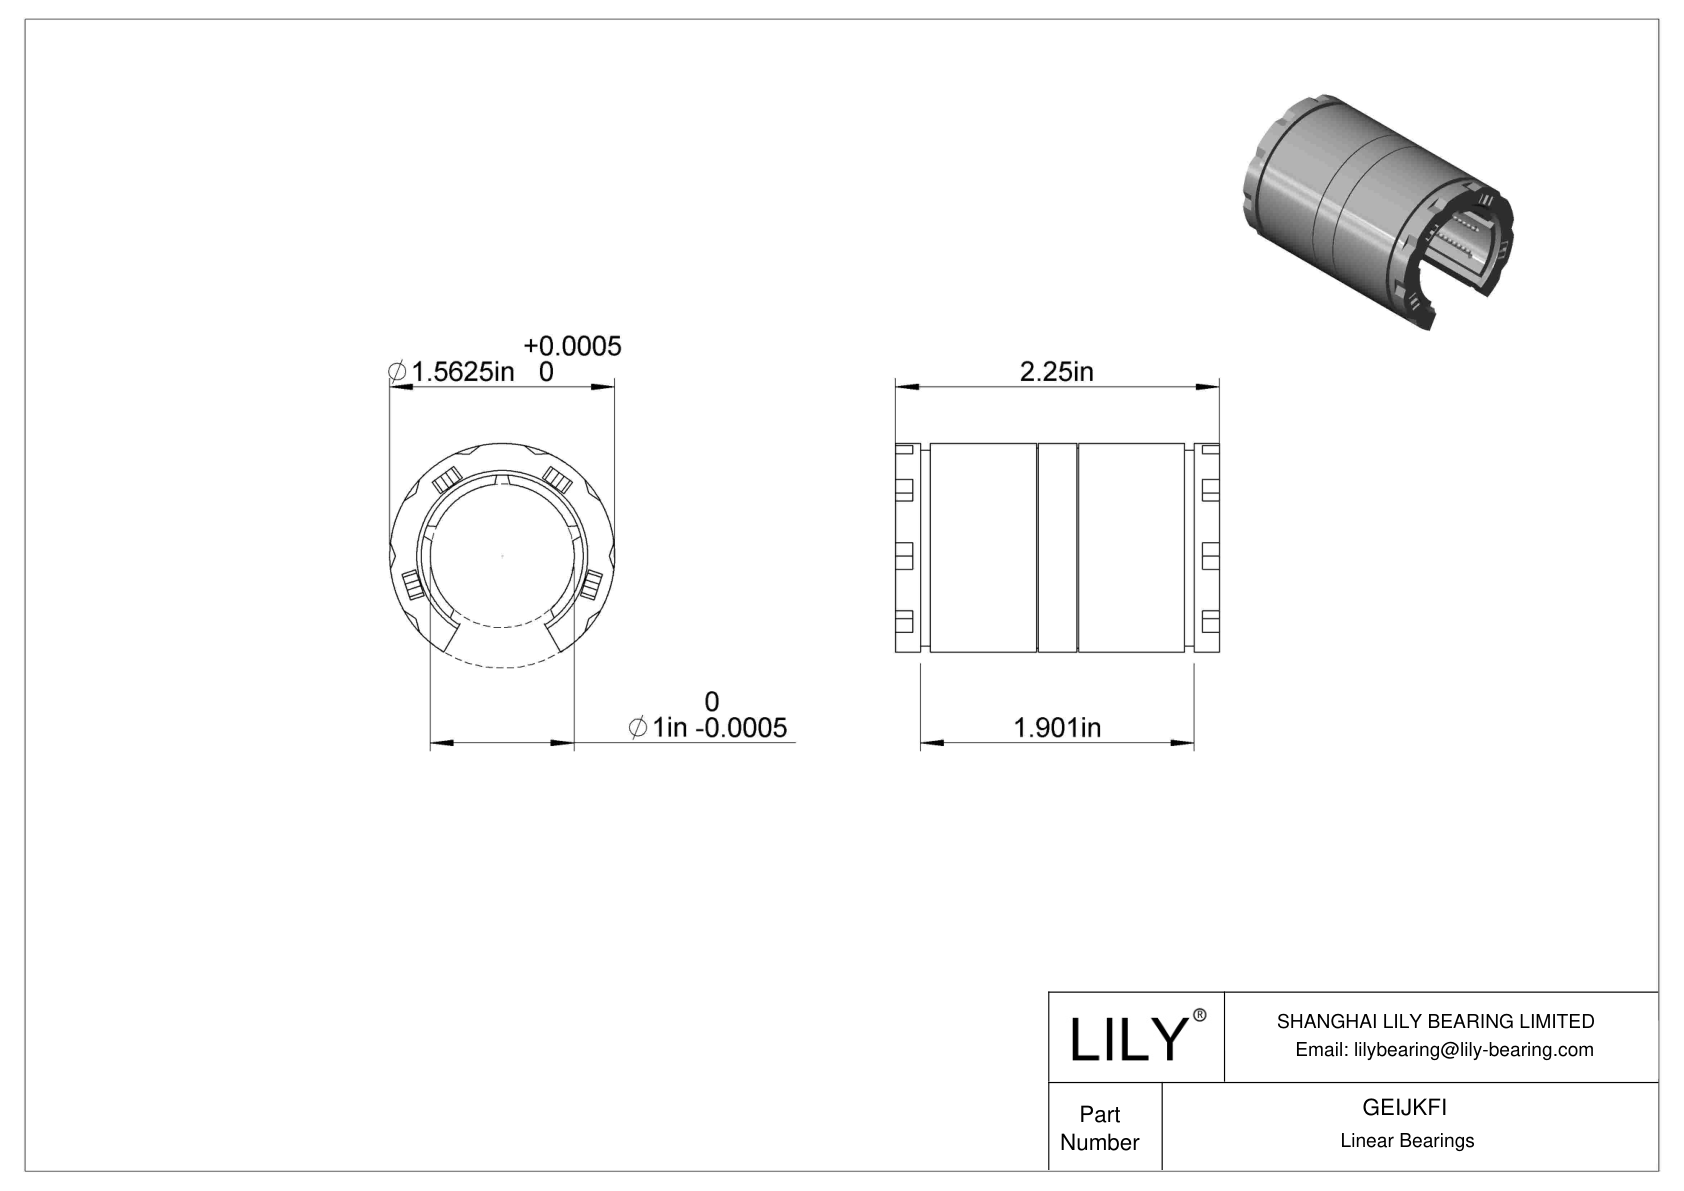 GEIJKFI High-Load Linear Ball Bearings for Support Rail Shafts cad drawing